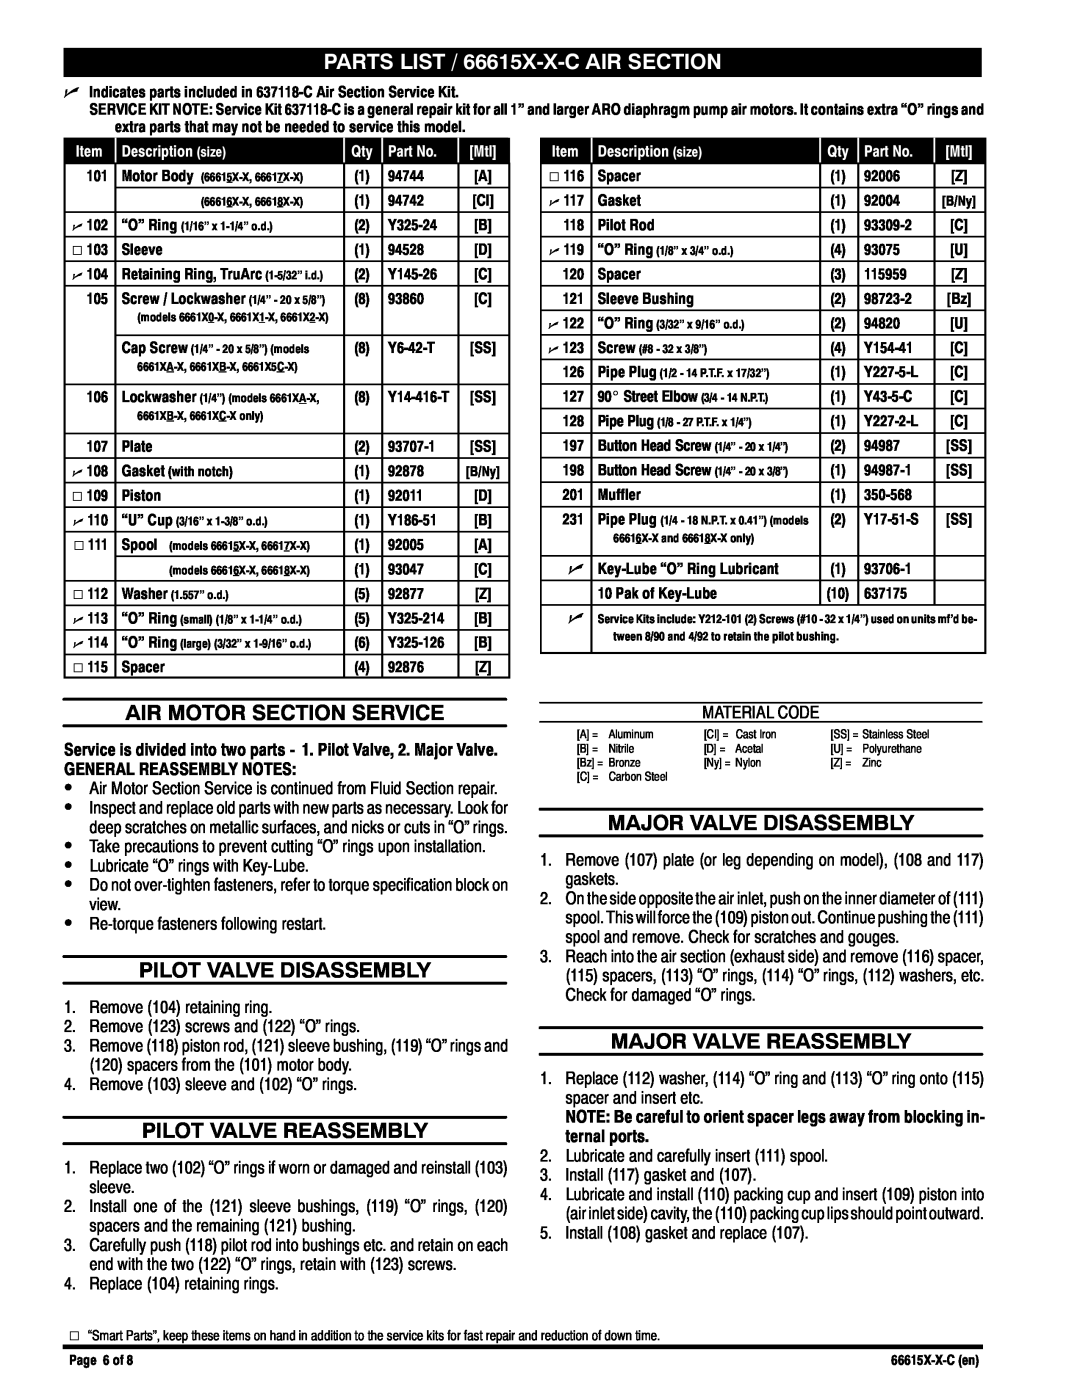 Ingersoll-Rand manual PARTS LIST / 66615X-X-C AIR SECTION, Air Motor Section Service, Pilot Valve Disassembly 